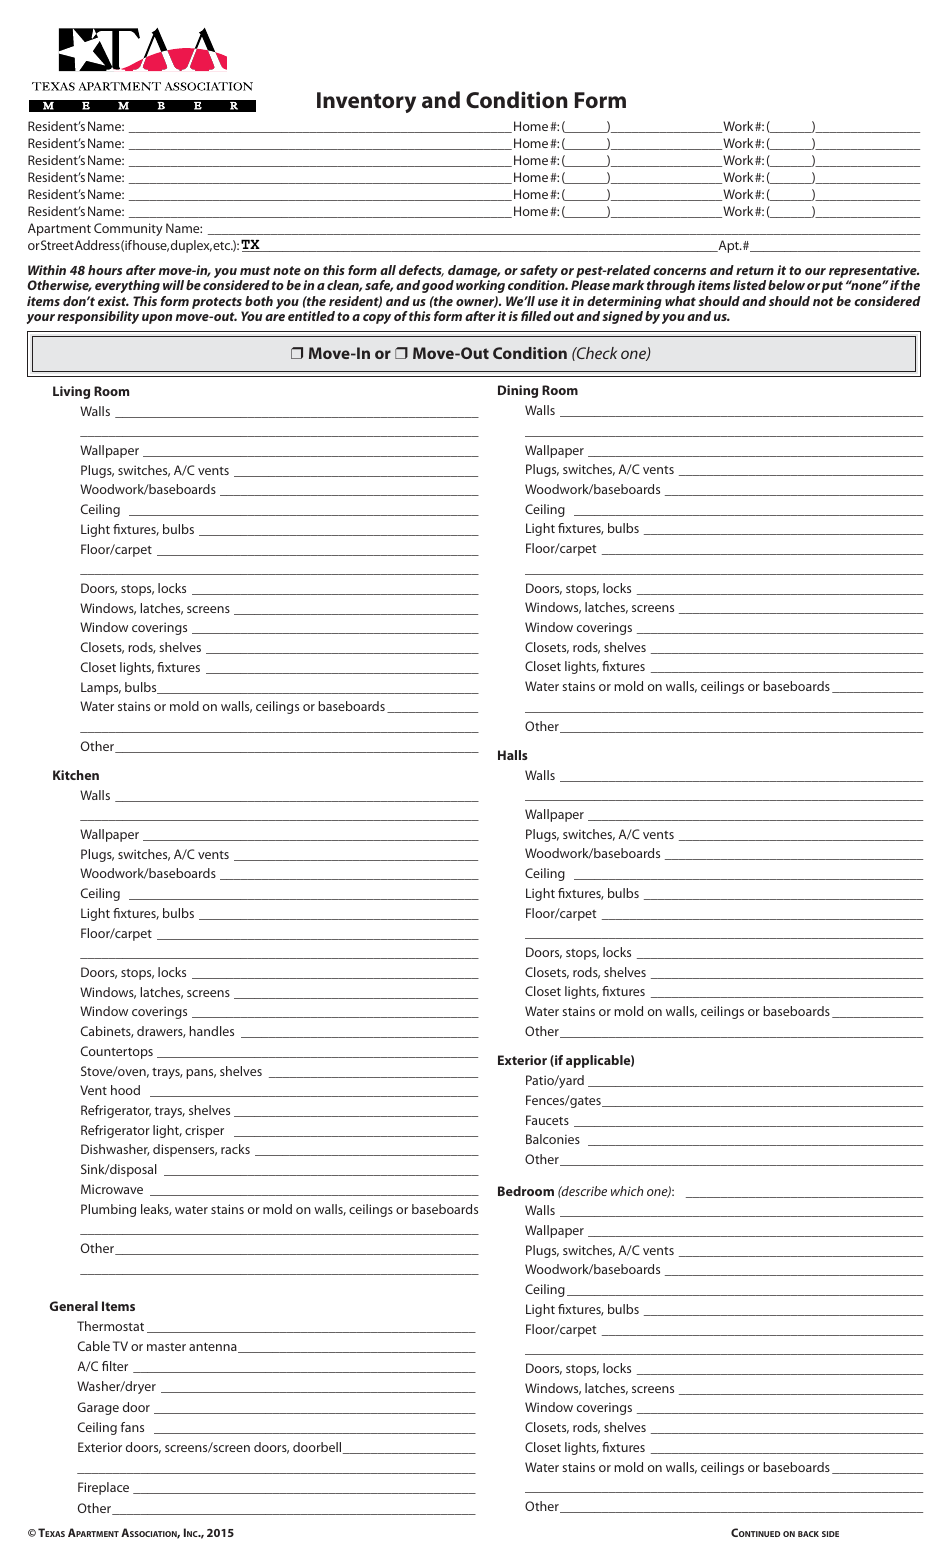 Inventory and Condition Form - Texas Apartment Association - Texas, Page 1